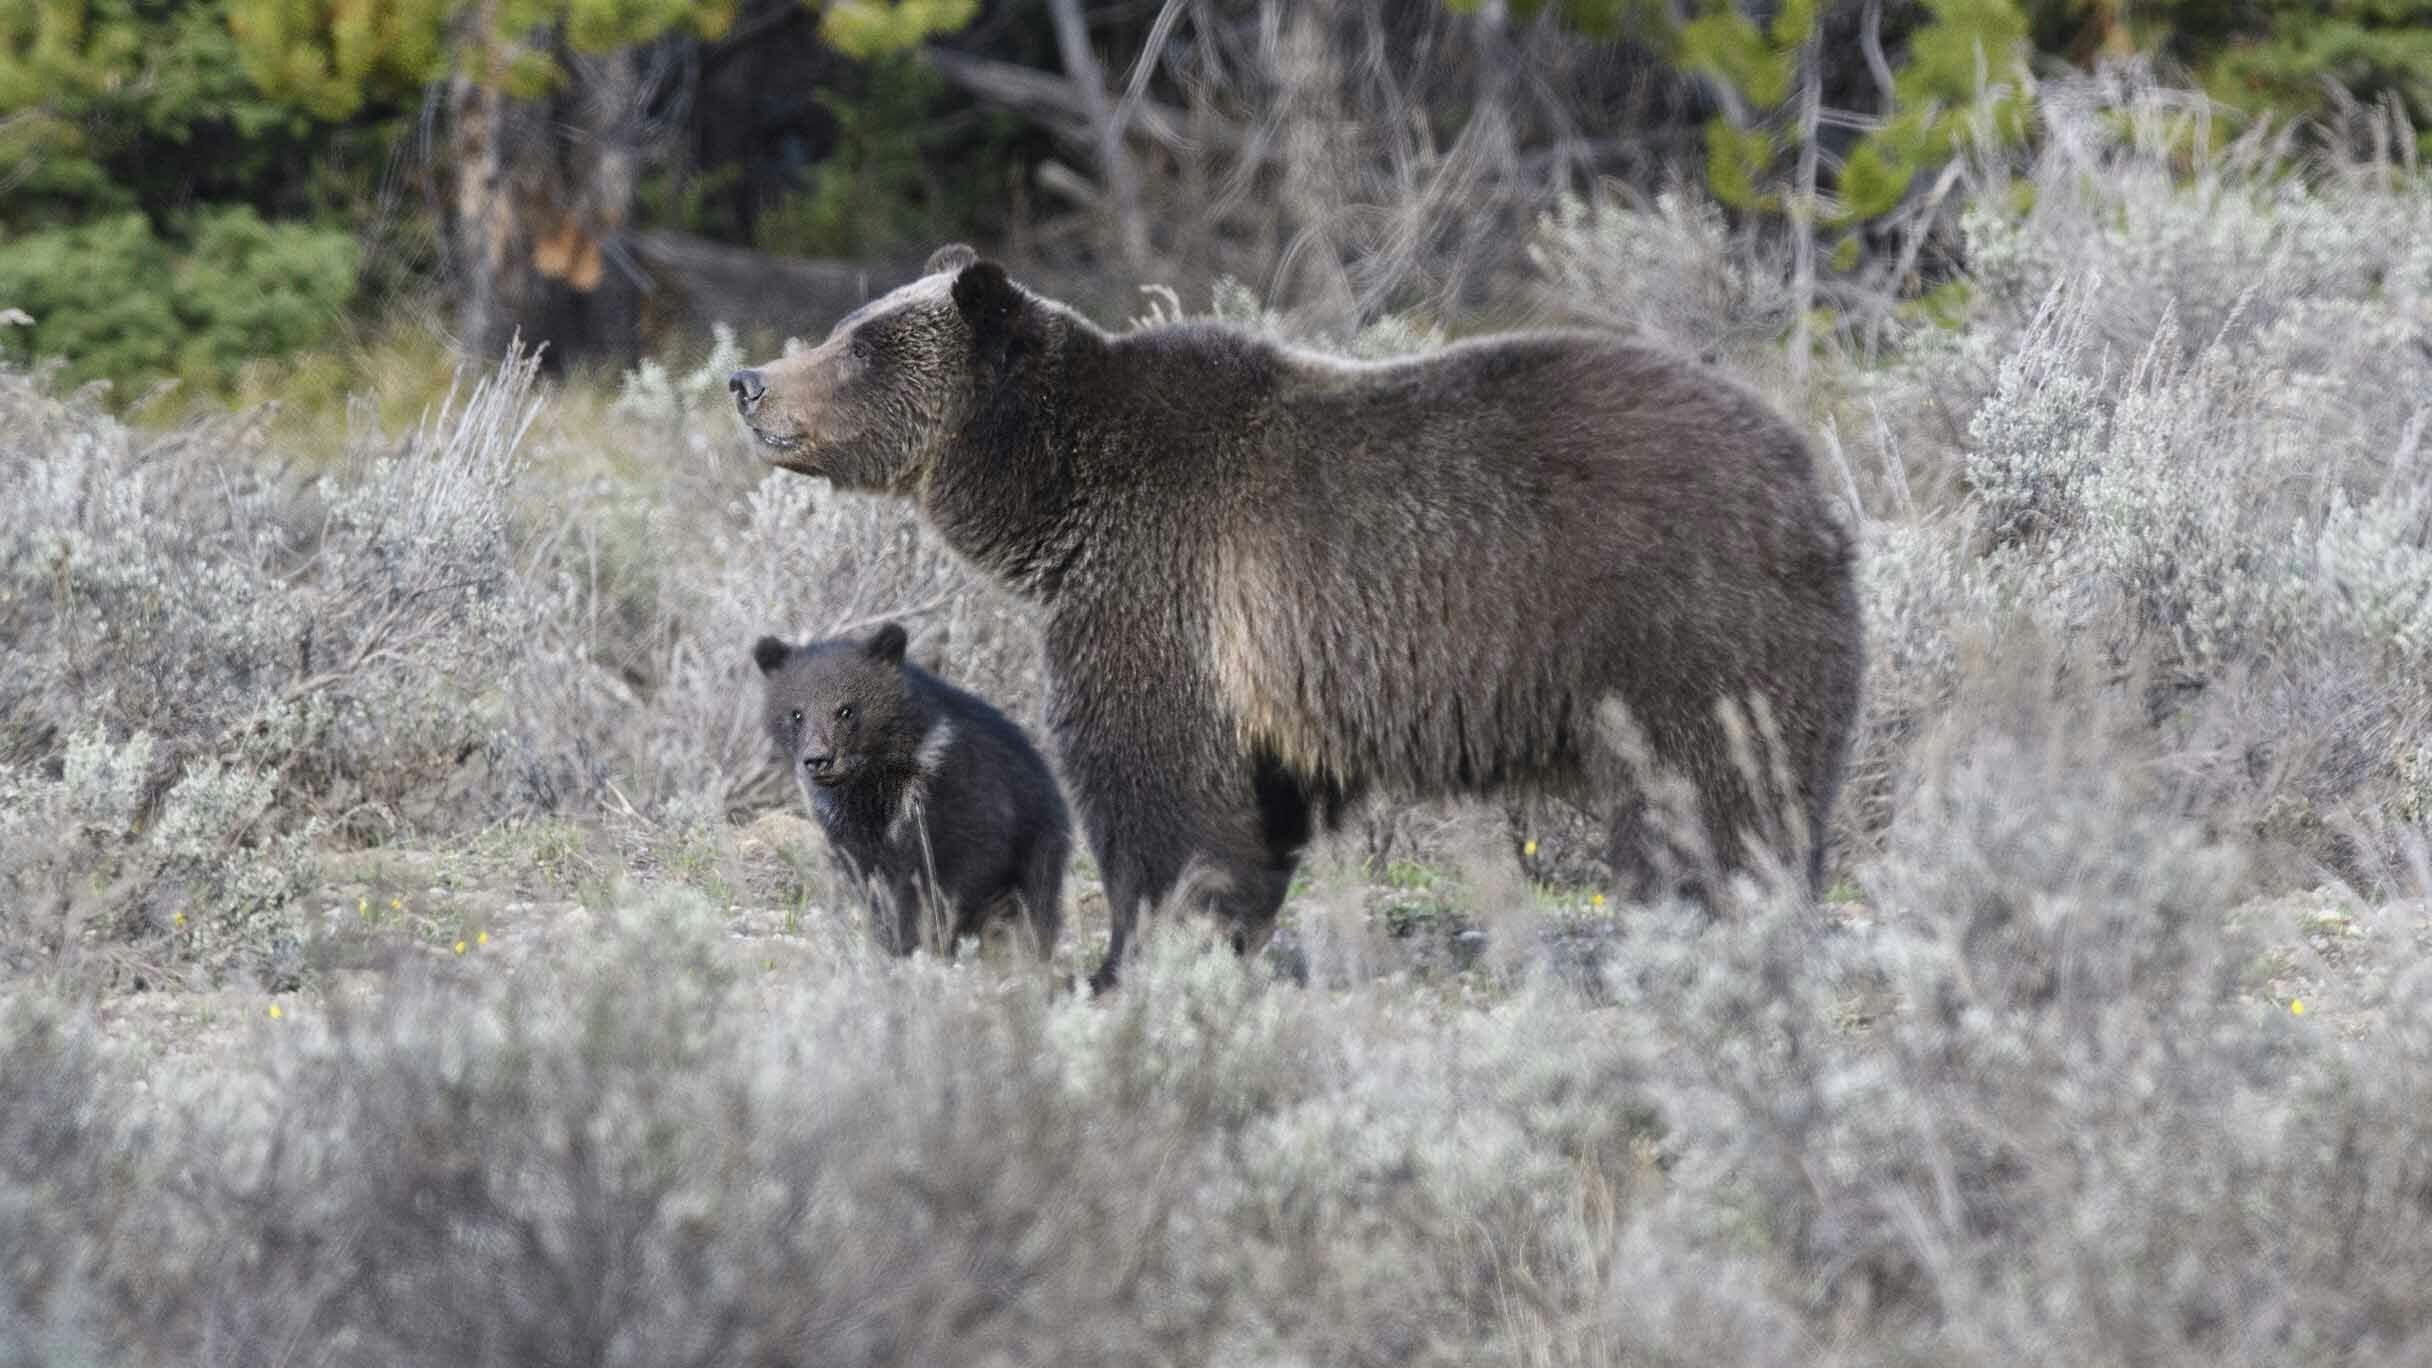 Grizzly 399 and her 2023 cub. (Photo is owned by Jorn Vangoidtsenhoven and may not be reproduced)